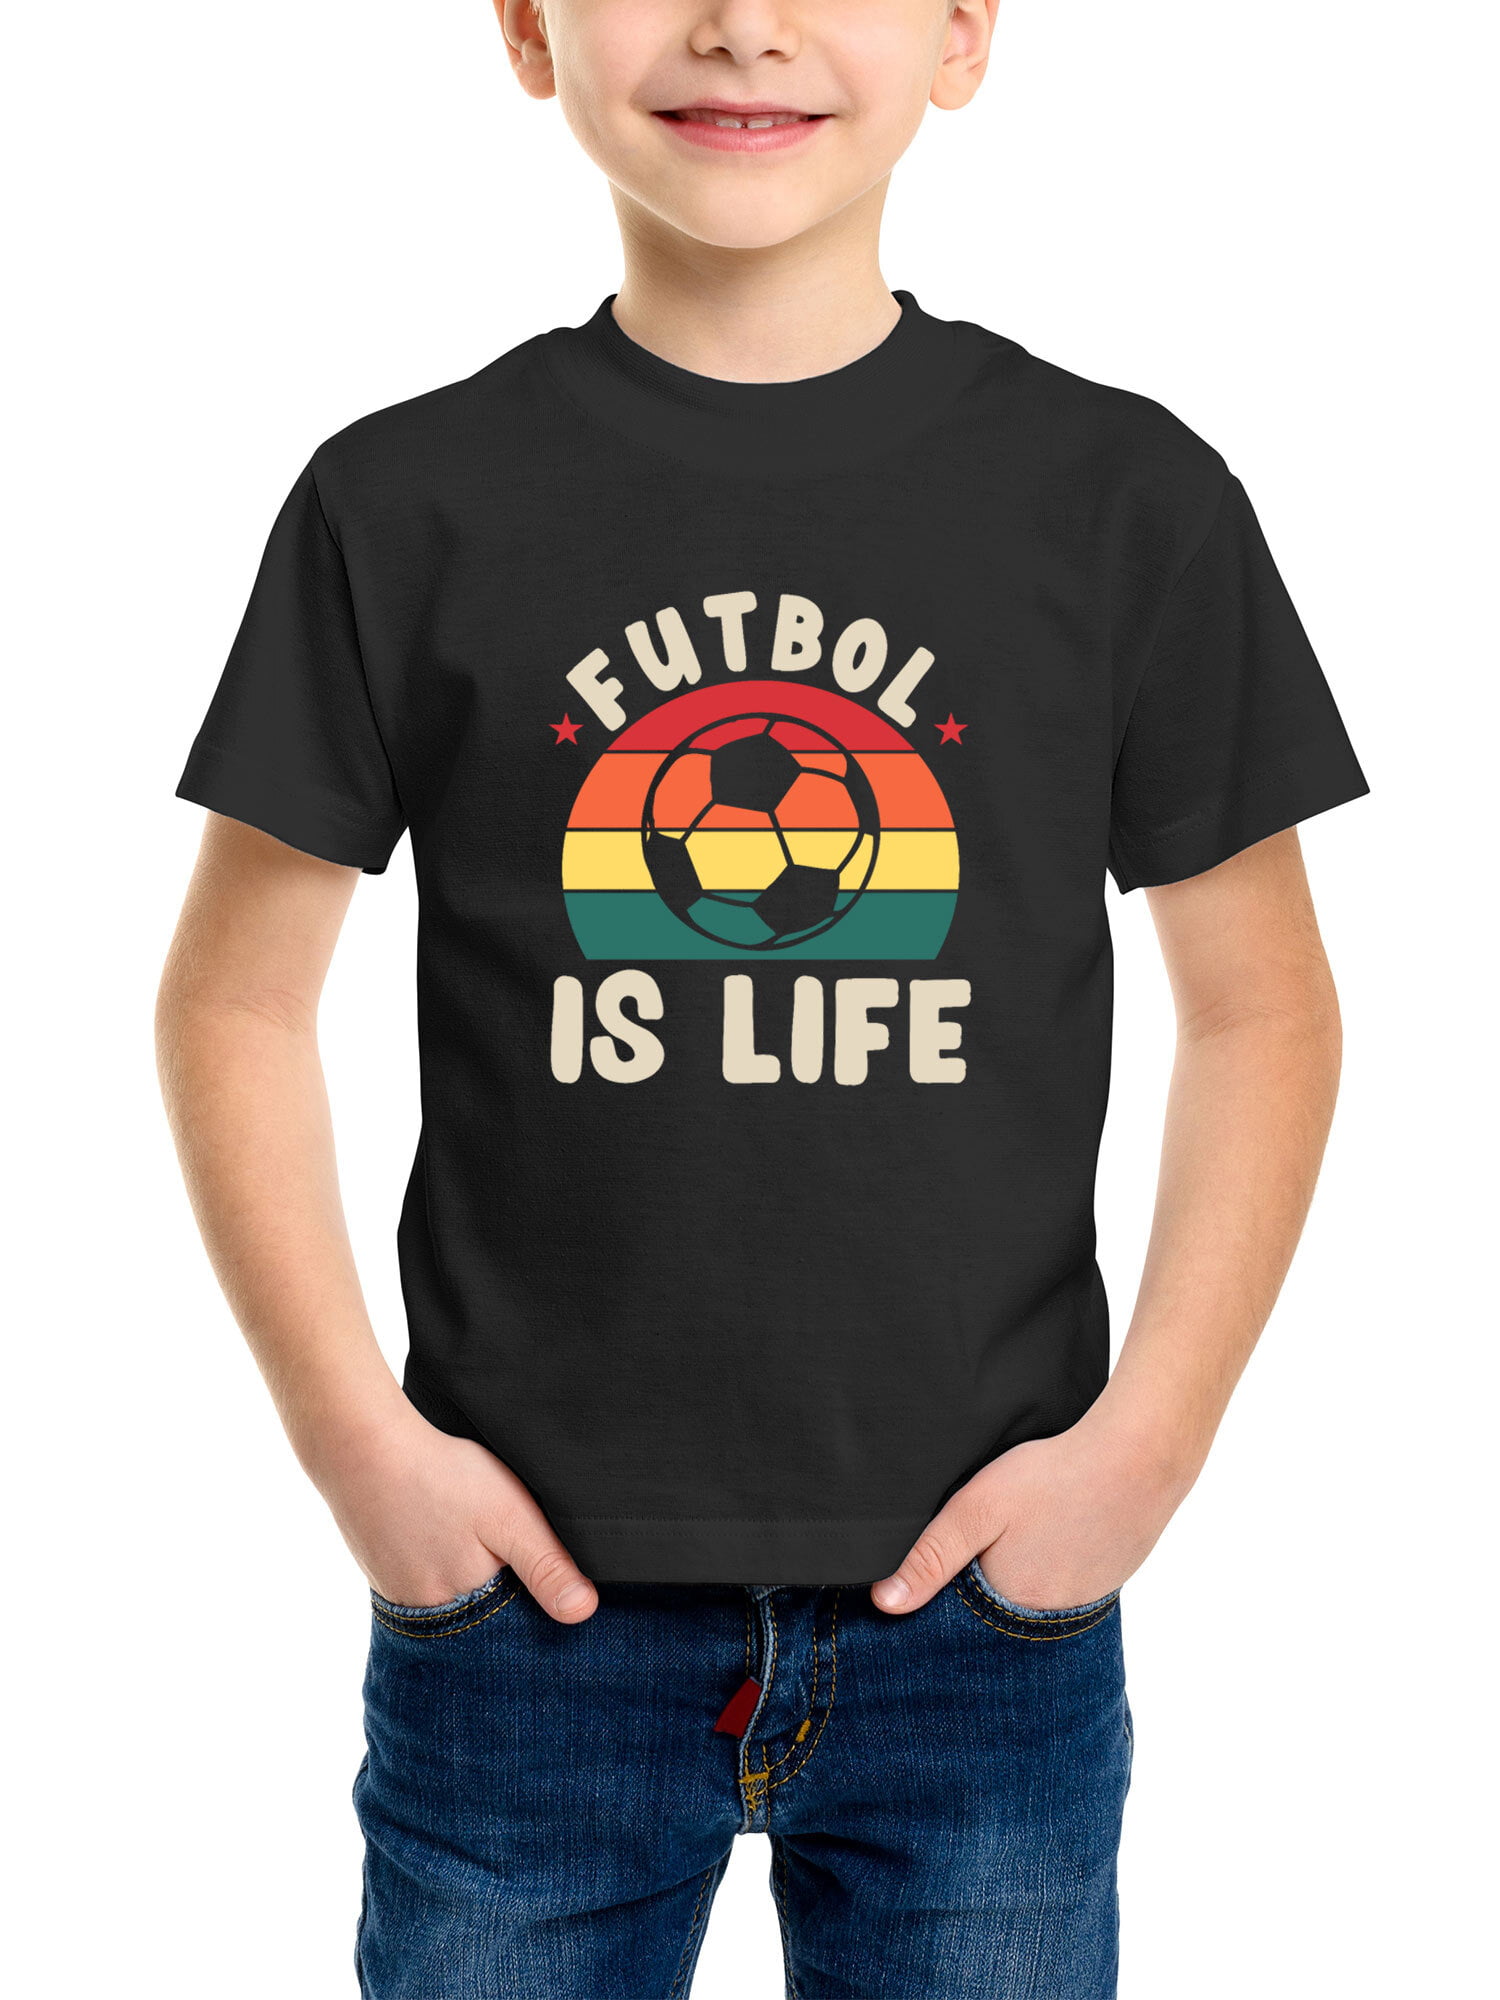 One Day Ill Play Soccer Just Like My Papaw Toddler/Kids Long Sleeve T-Shirt